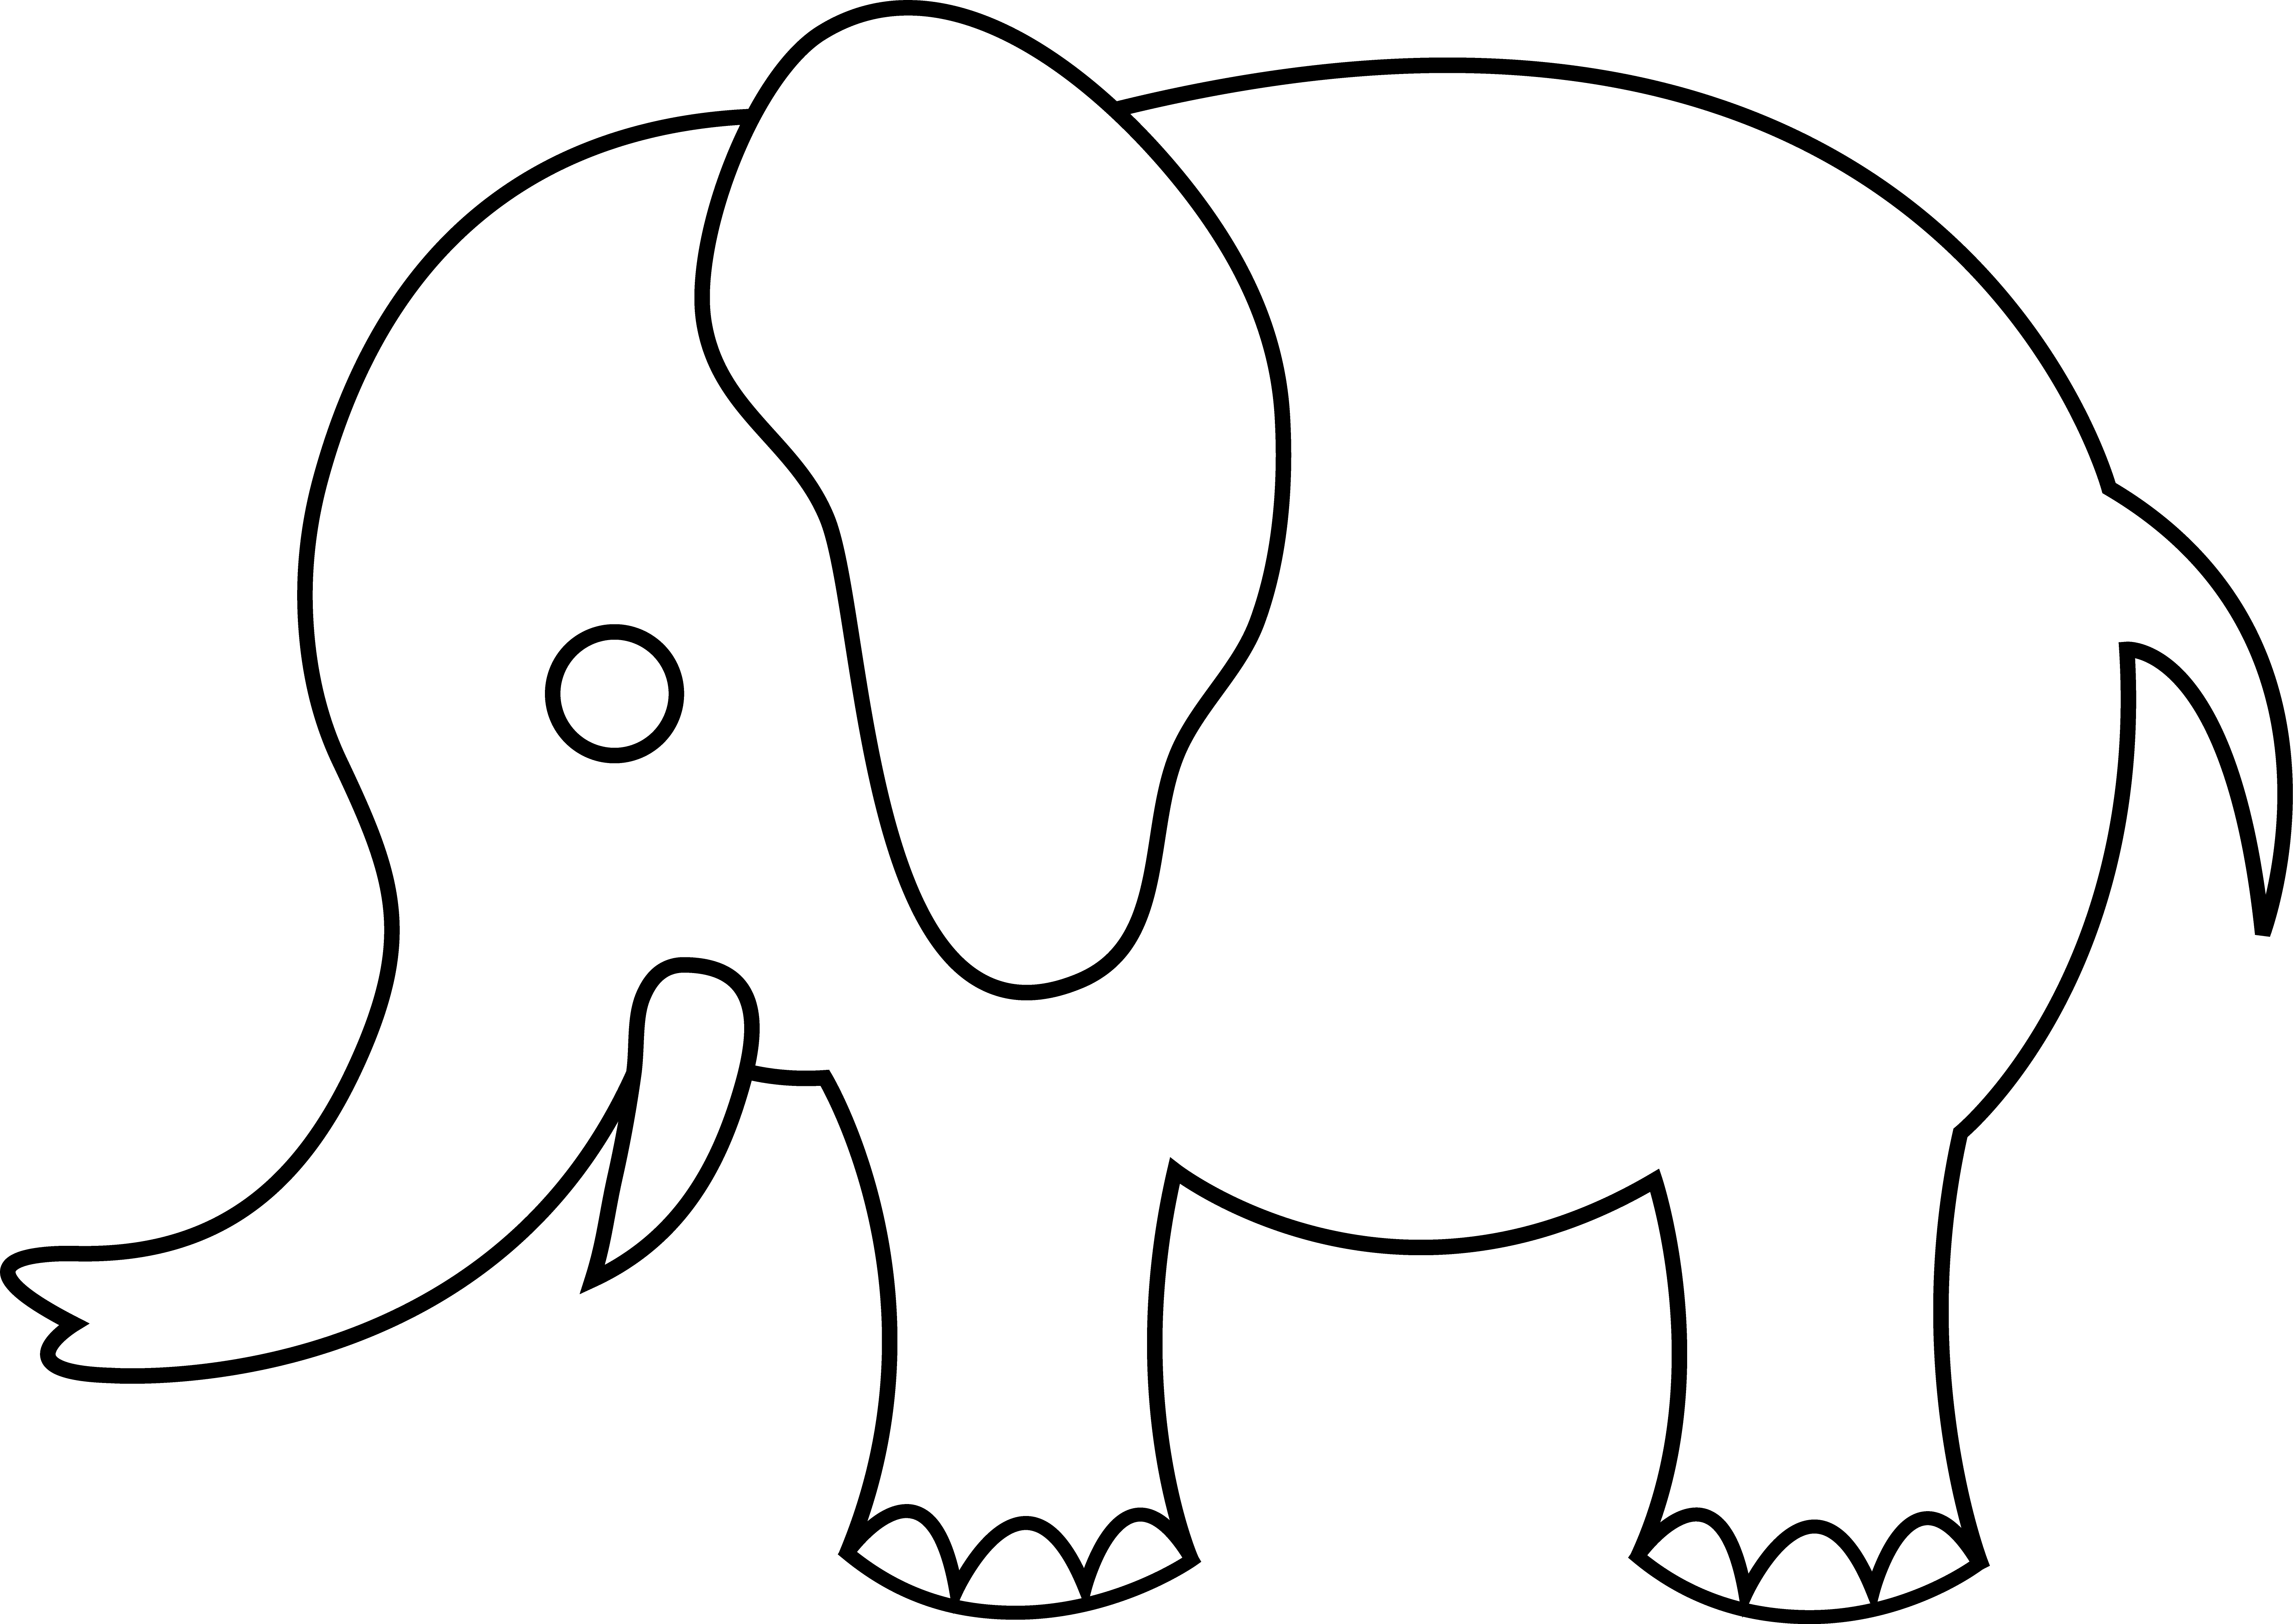 Wise by Elise Gomez drawing of an elephant with gray ears and rosy cheeks  white background – Havenlight.com